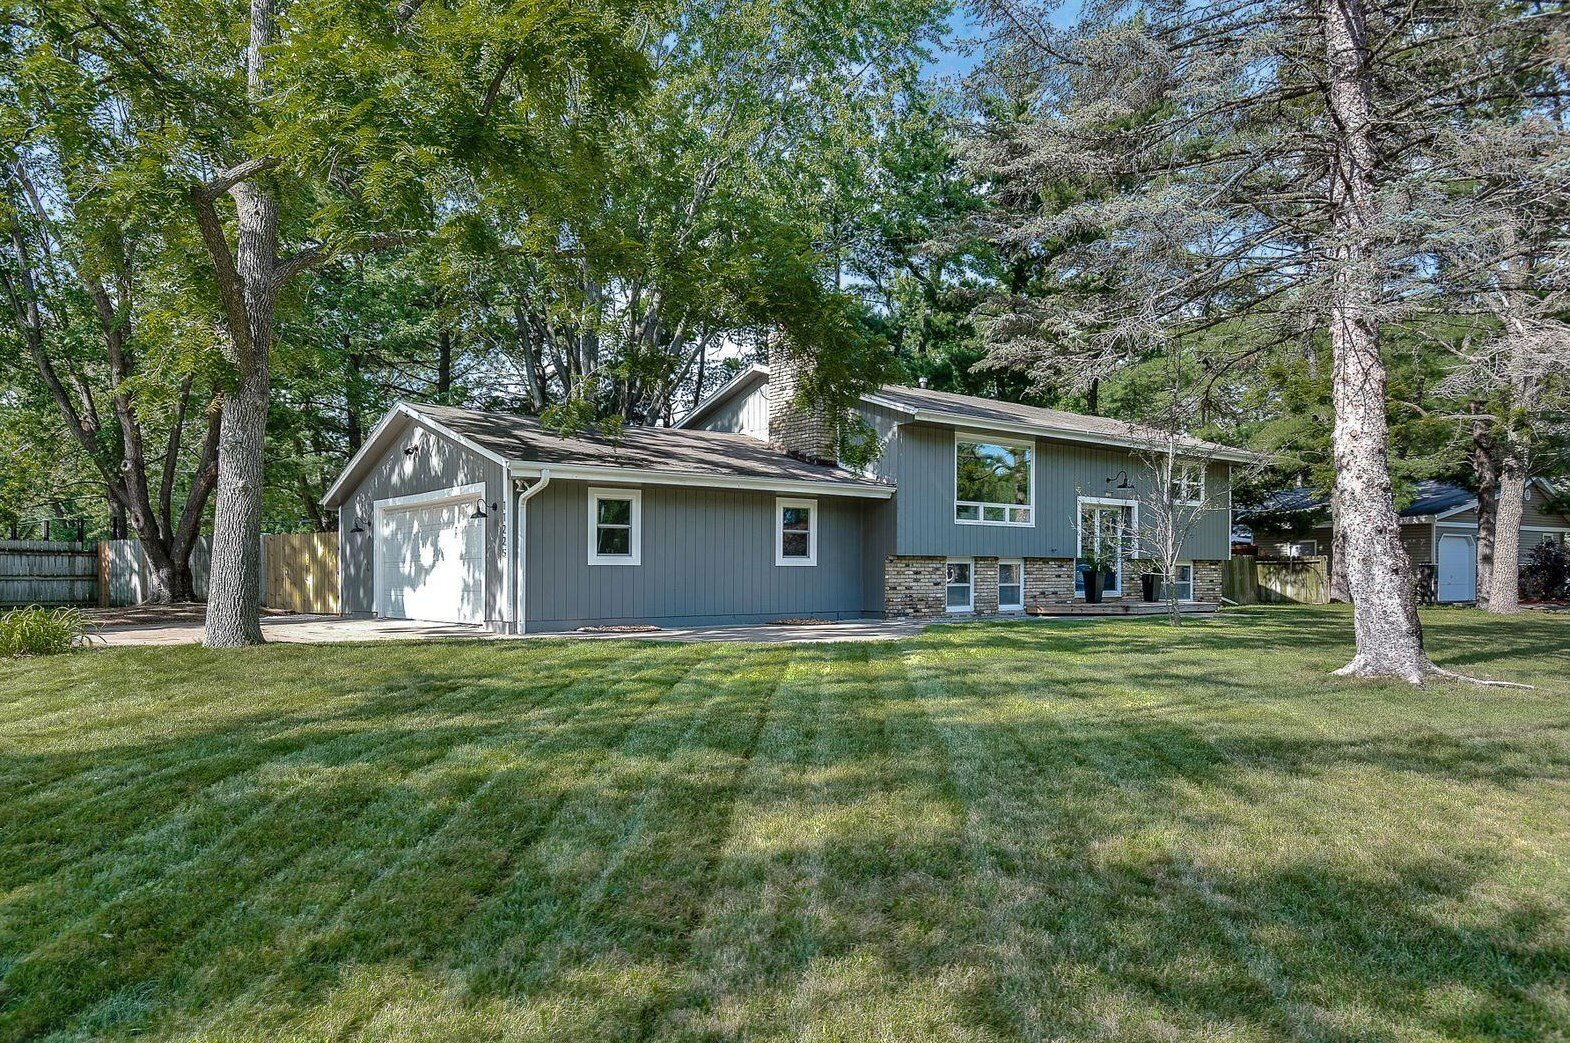 ✨ C O M I N G ✨ S O O N ! ✨⁠

11225 Maryland Ave N
Champlin, MN 55316

4 bed / 2 bath / 2 garage / 1,819 sqft⁠

Welcome to this fully remodeled home in Champlin! With 4 bedrooms + 2 bathrooms, this home is flooded with natural light throughout. Some 